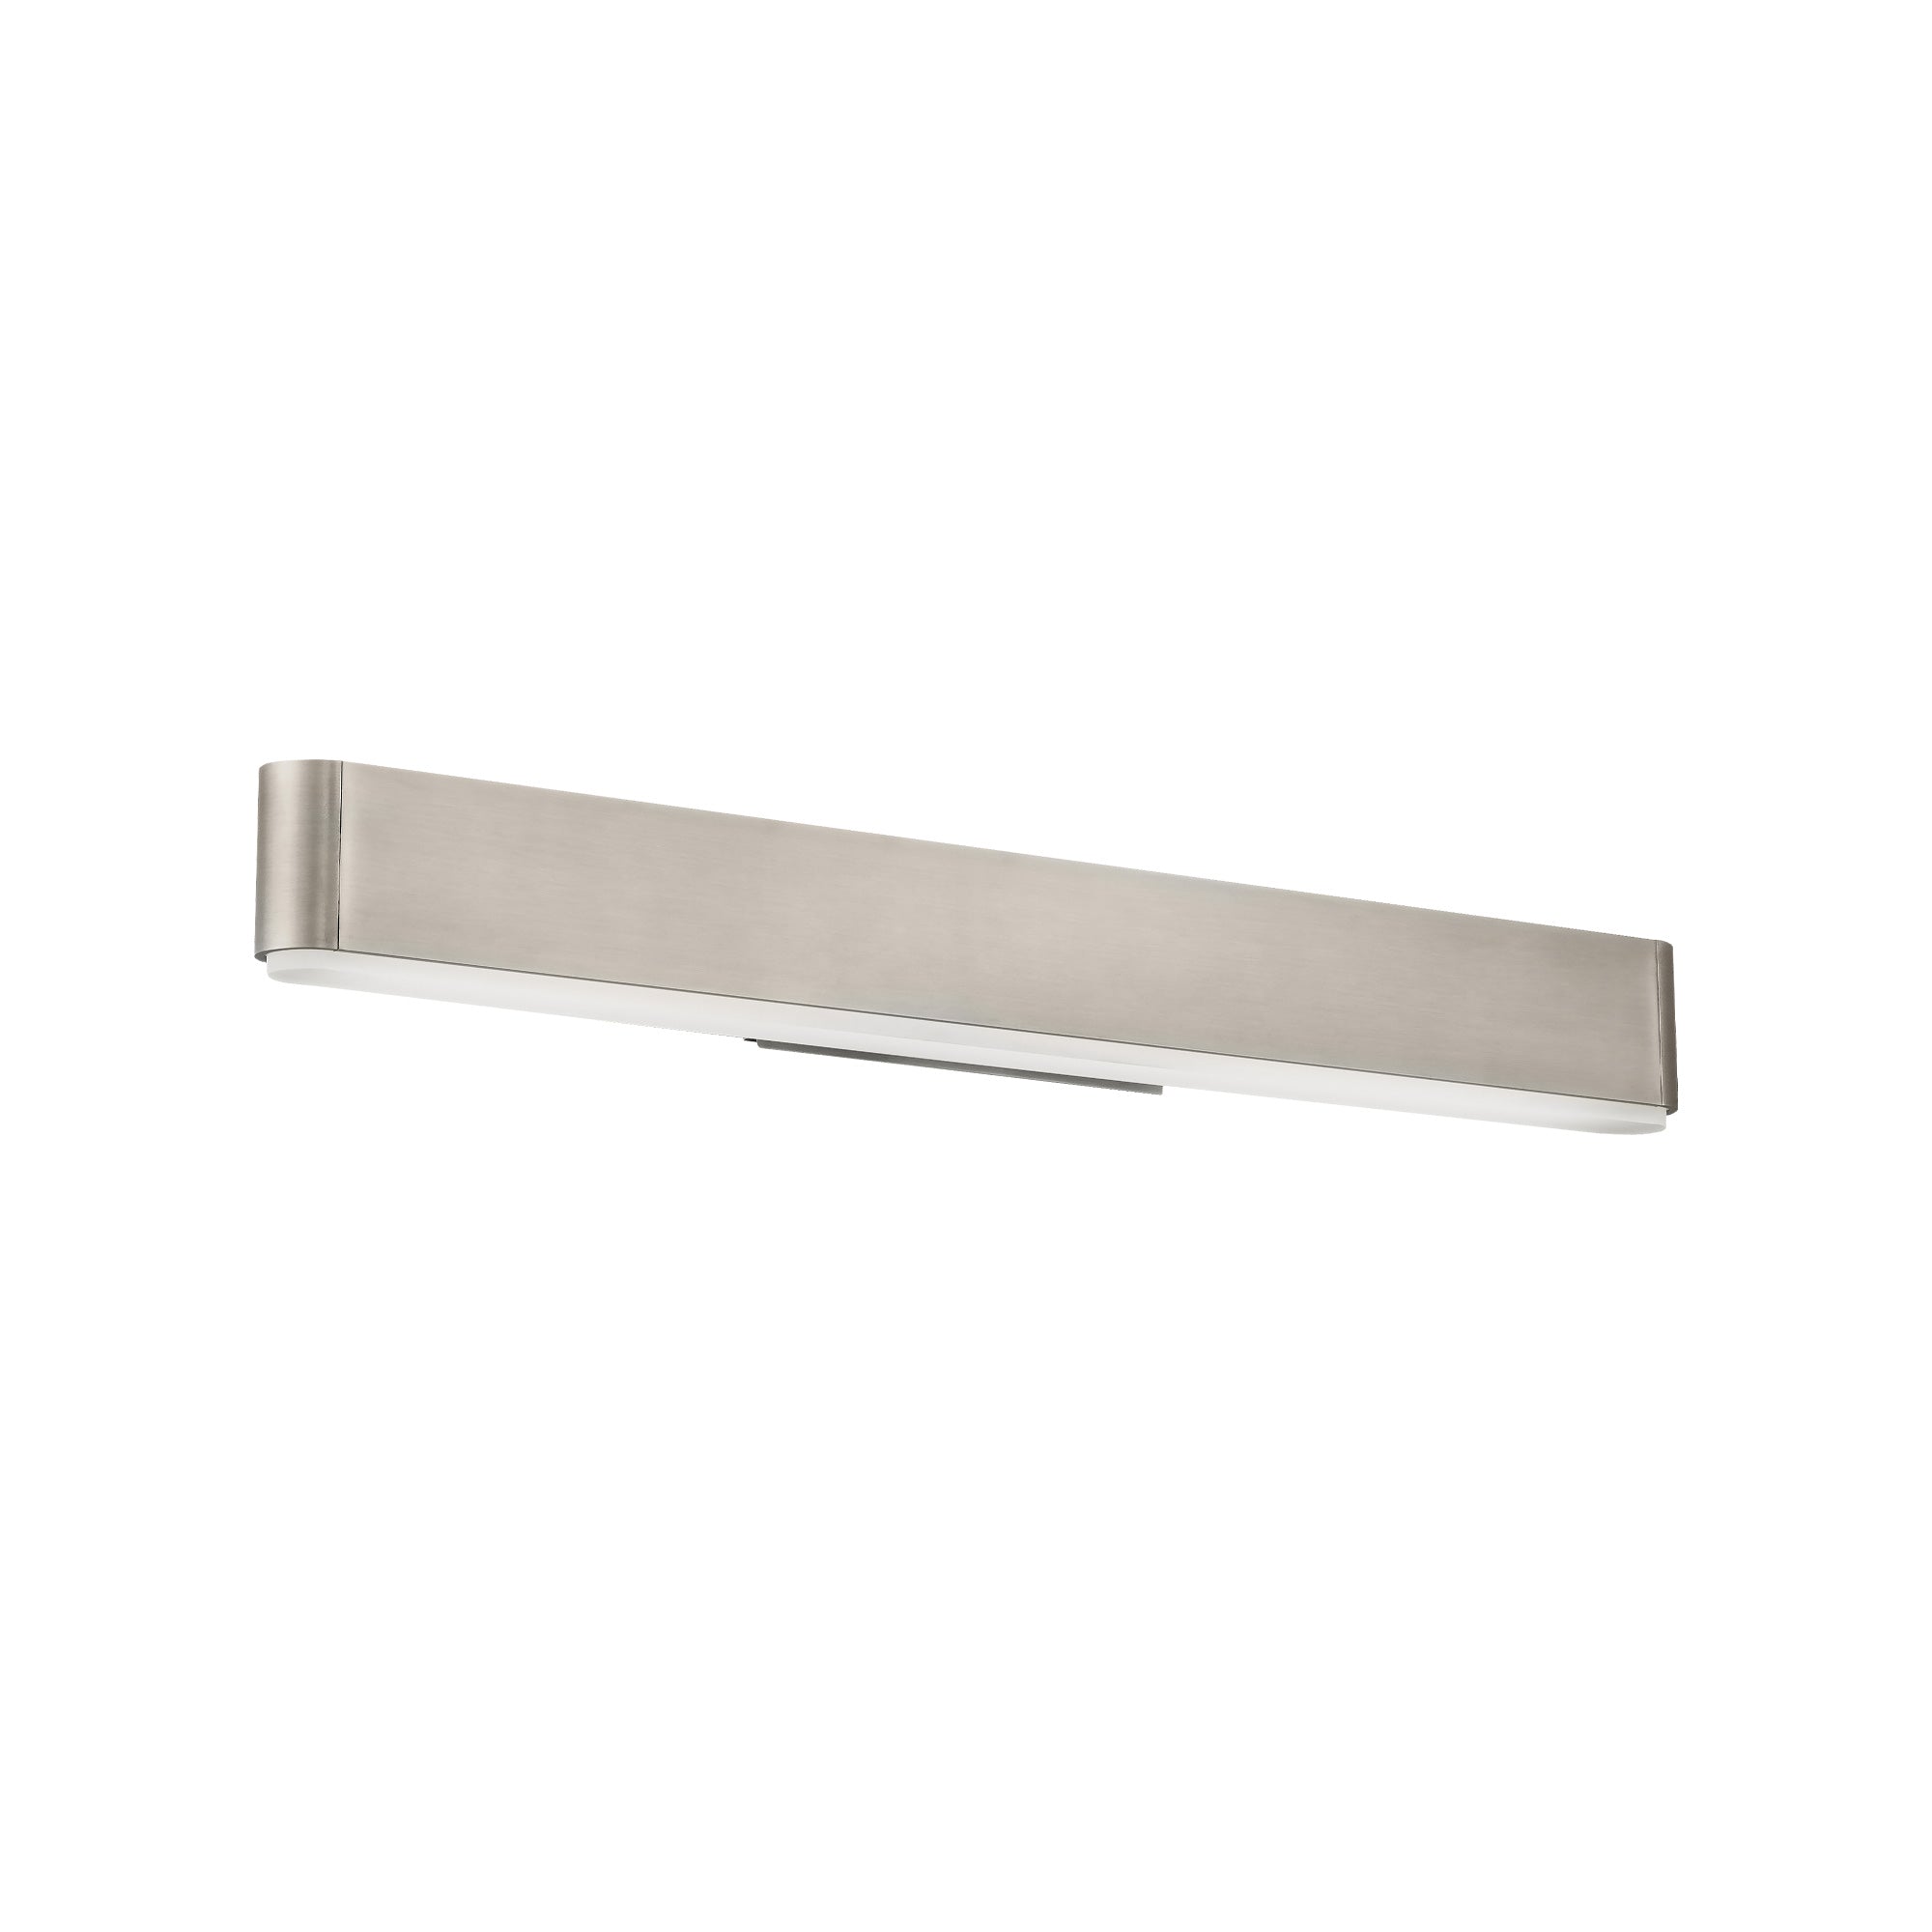 0 TO 60 Bathroom sconce Nickel INTEGRATED LED - WS-56124-35-BN | MODERN FORMS